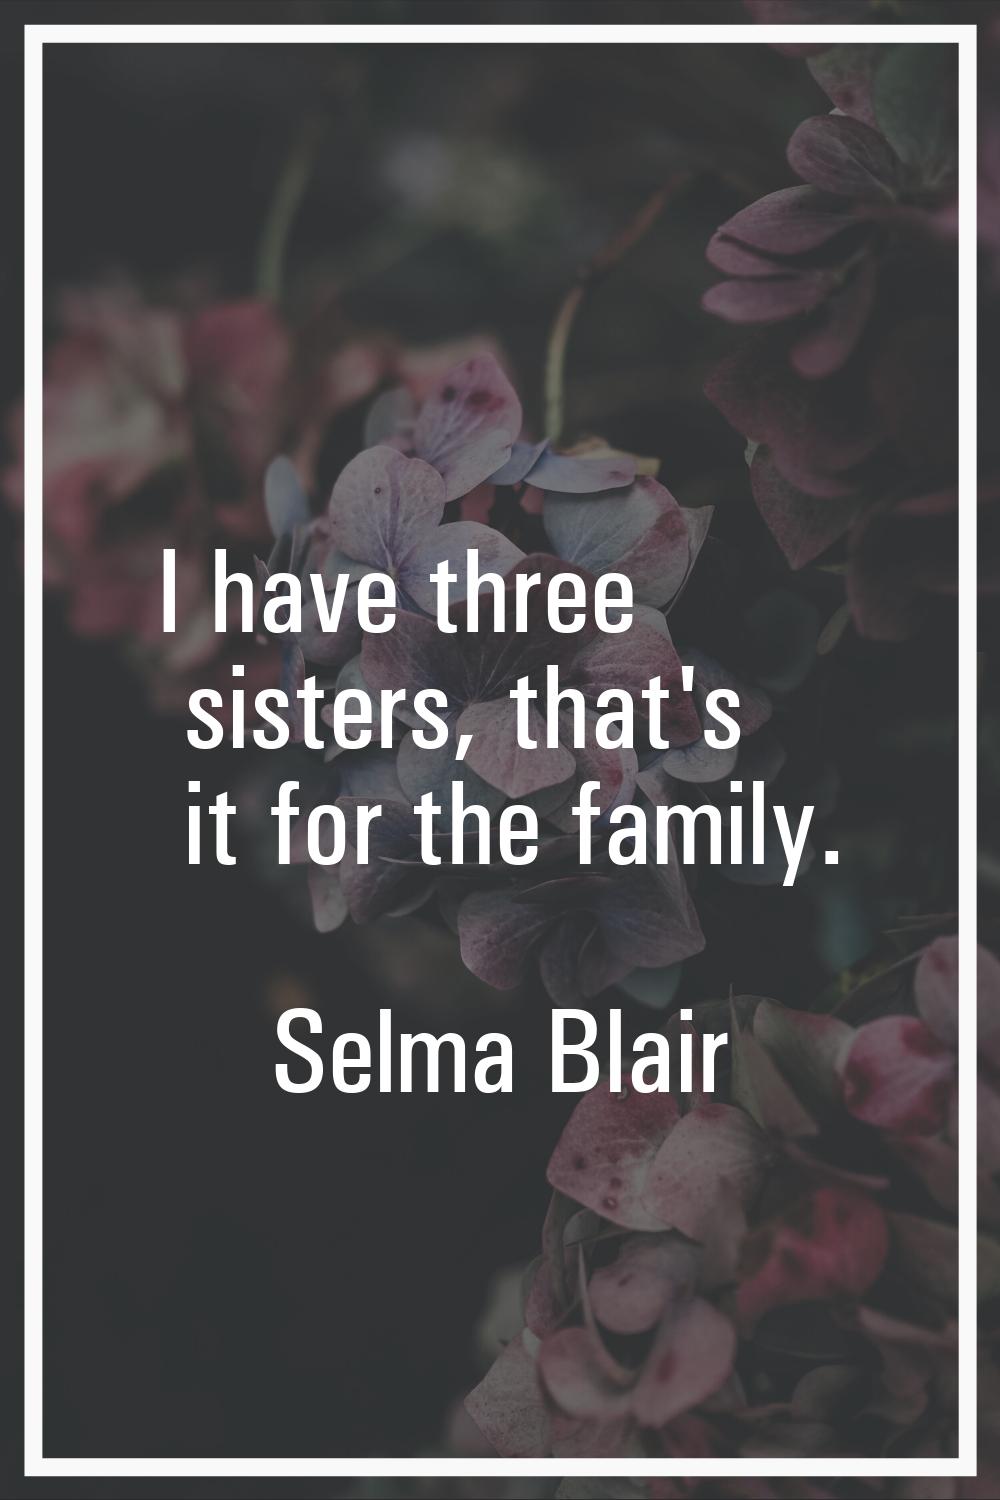 I have three sisters, that's it for the family.